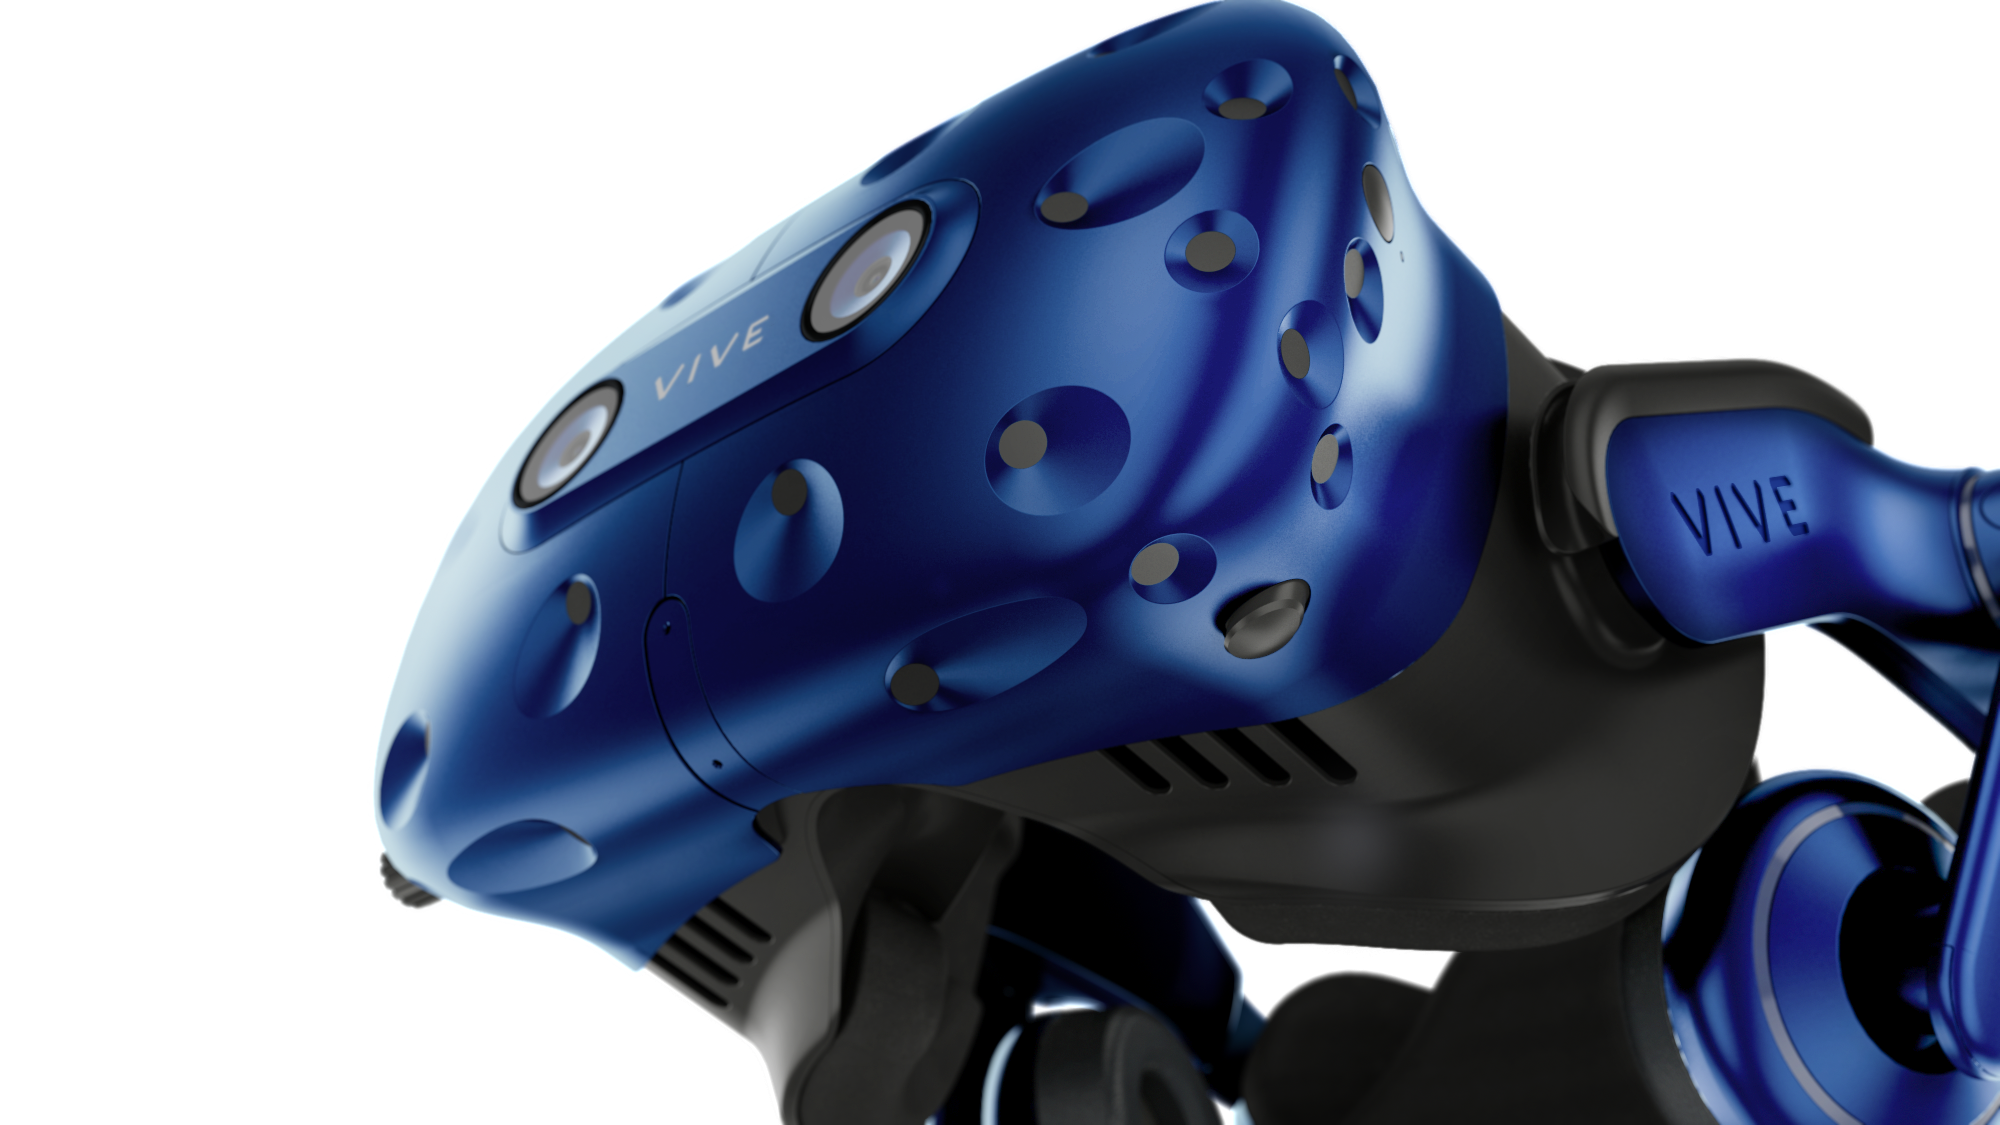 HTC Vive Pro vs Vive: should you upgrade to the high-end headset? | TechRadar